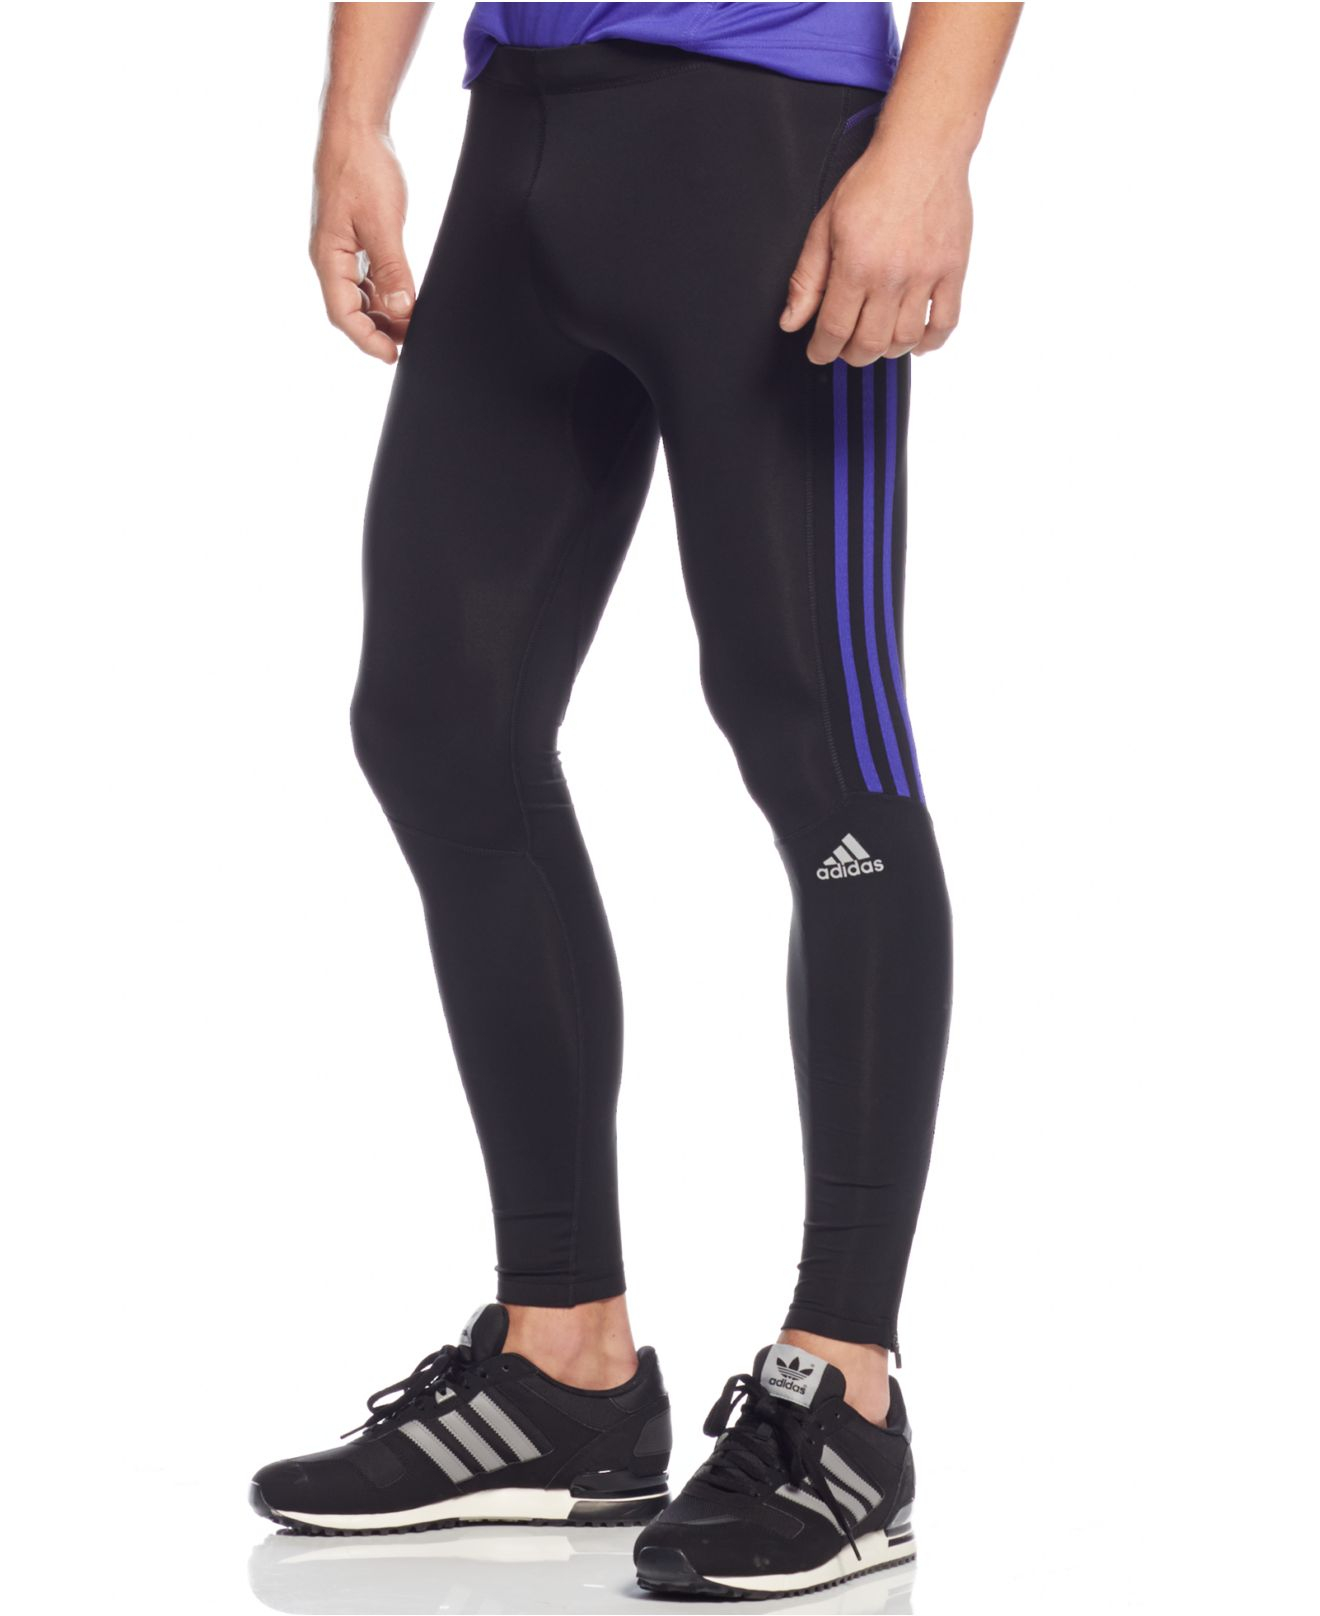 adidas Response Climalite Tights in Black/Purple (Black) for Men - Lyst